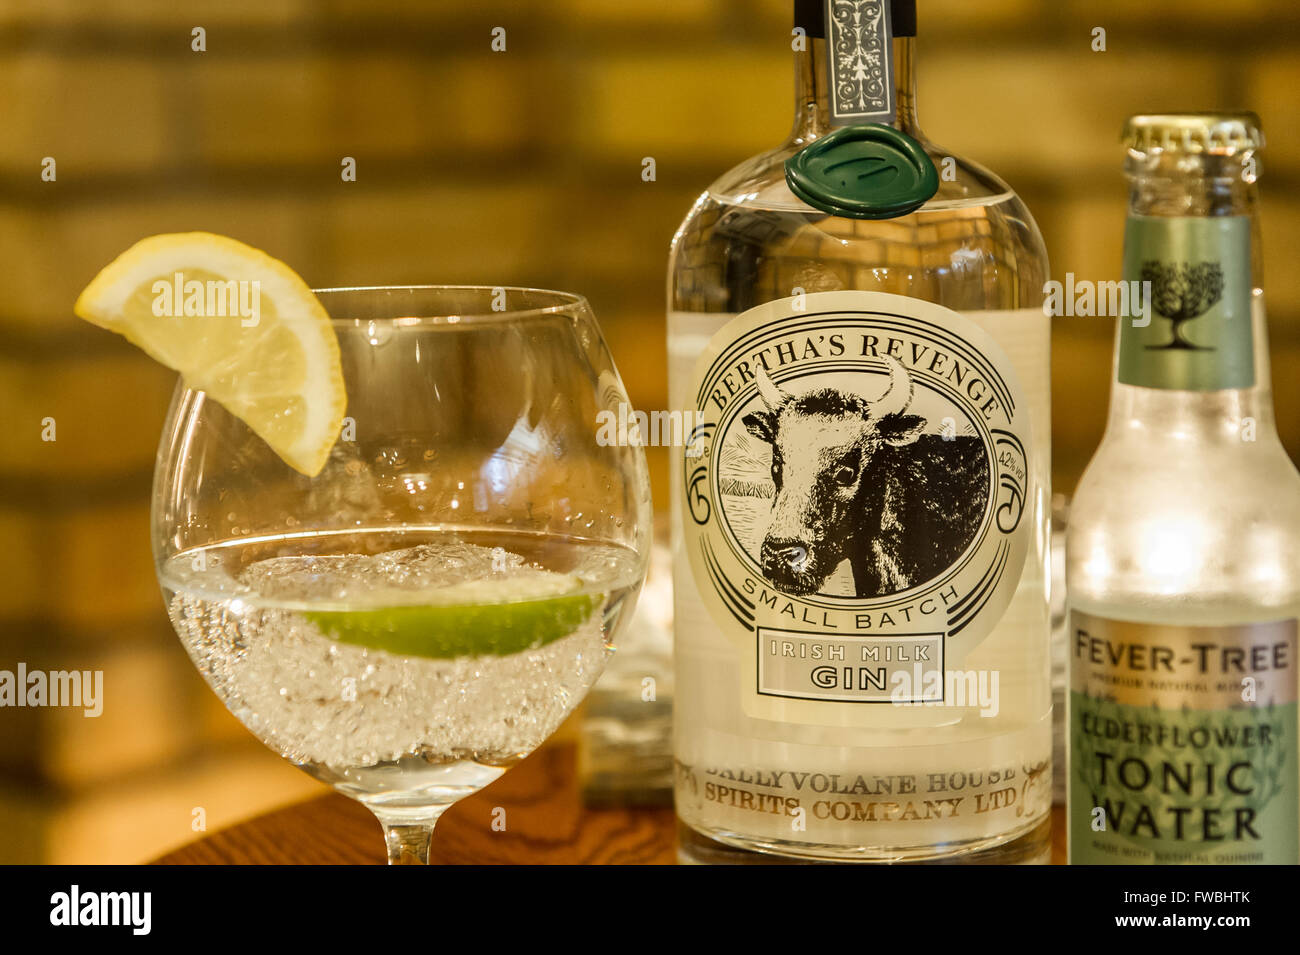 Bertha's Revenge Gin, Fever Tree Tonic Water and a glass of gin with ice, lime and lemon. Stock Photo